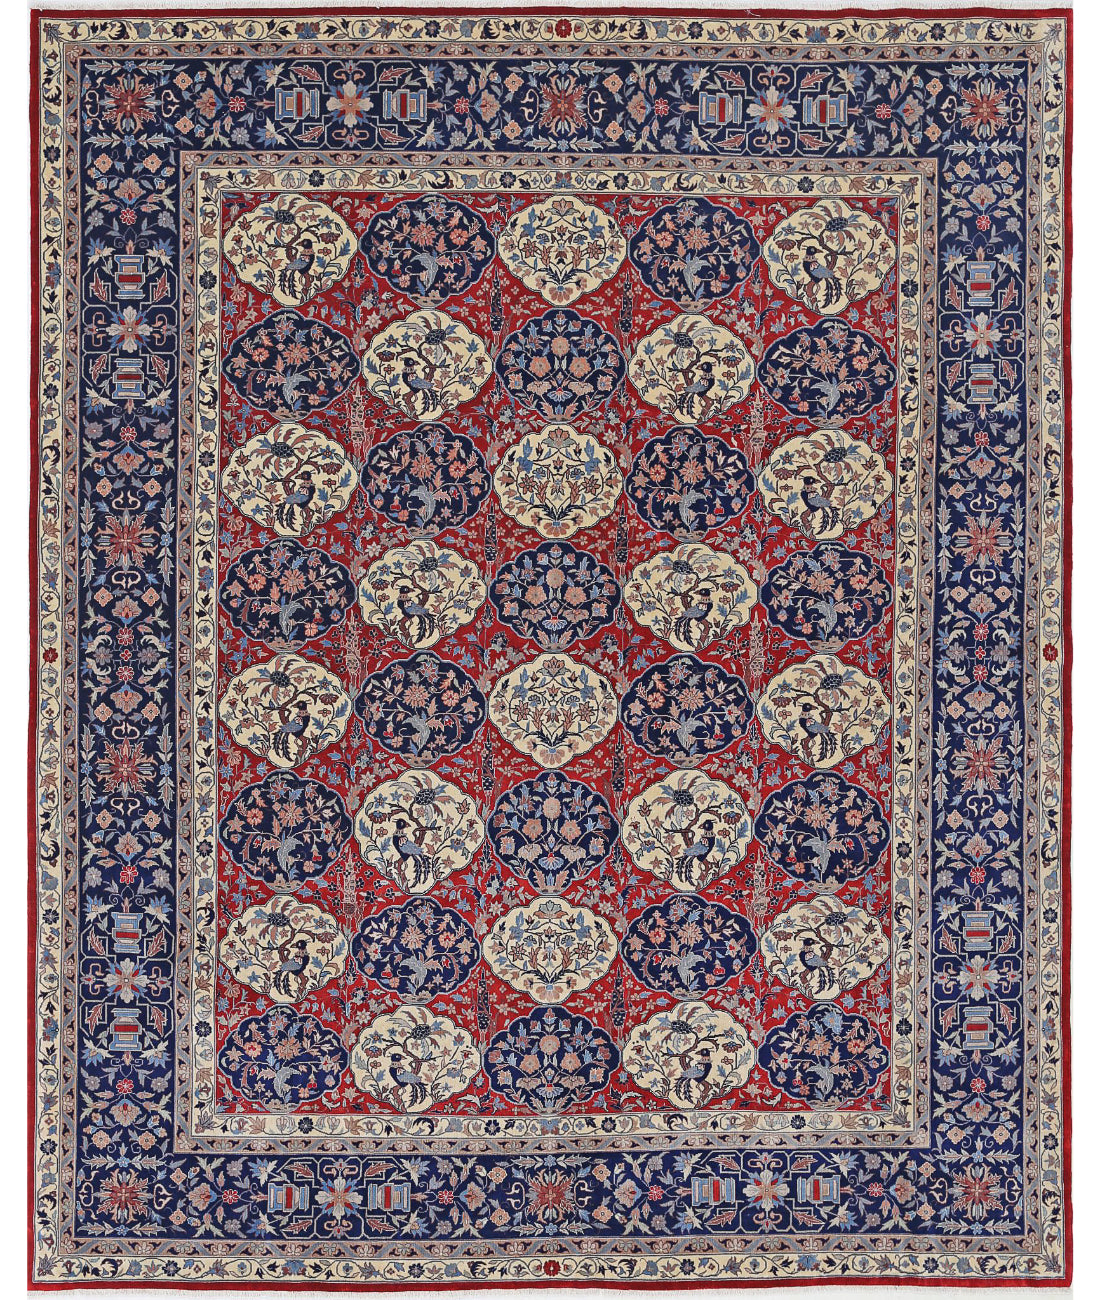 Hand Knotted Heritage Fine Persian Style Wool Rug - 8'1'' x 10'0'' 8'1'' x 10'0'' (243 X 300) / Red / Blue